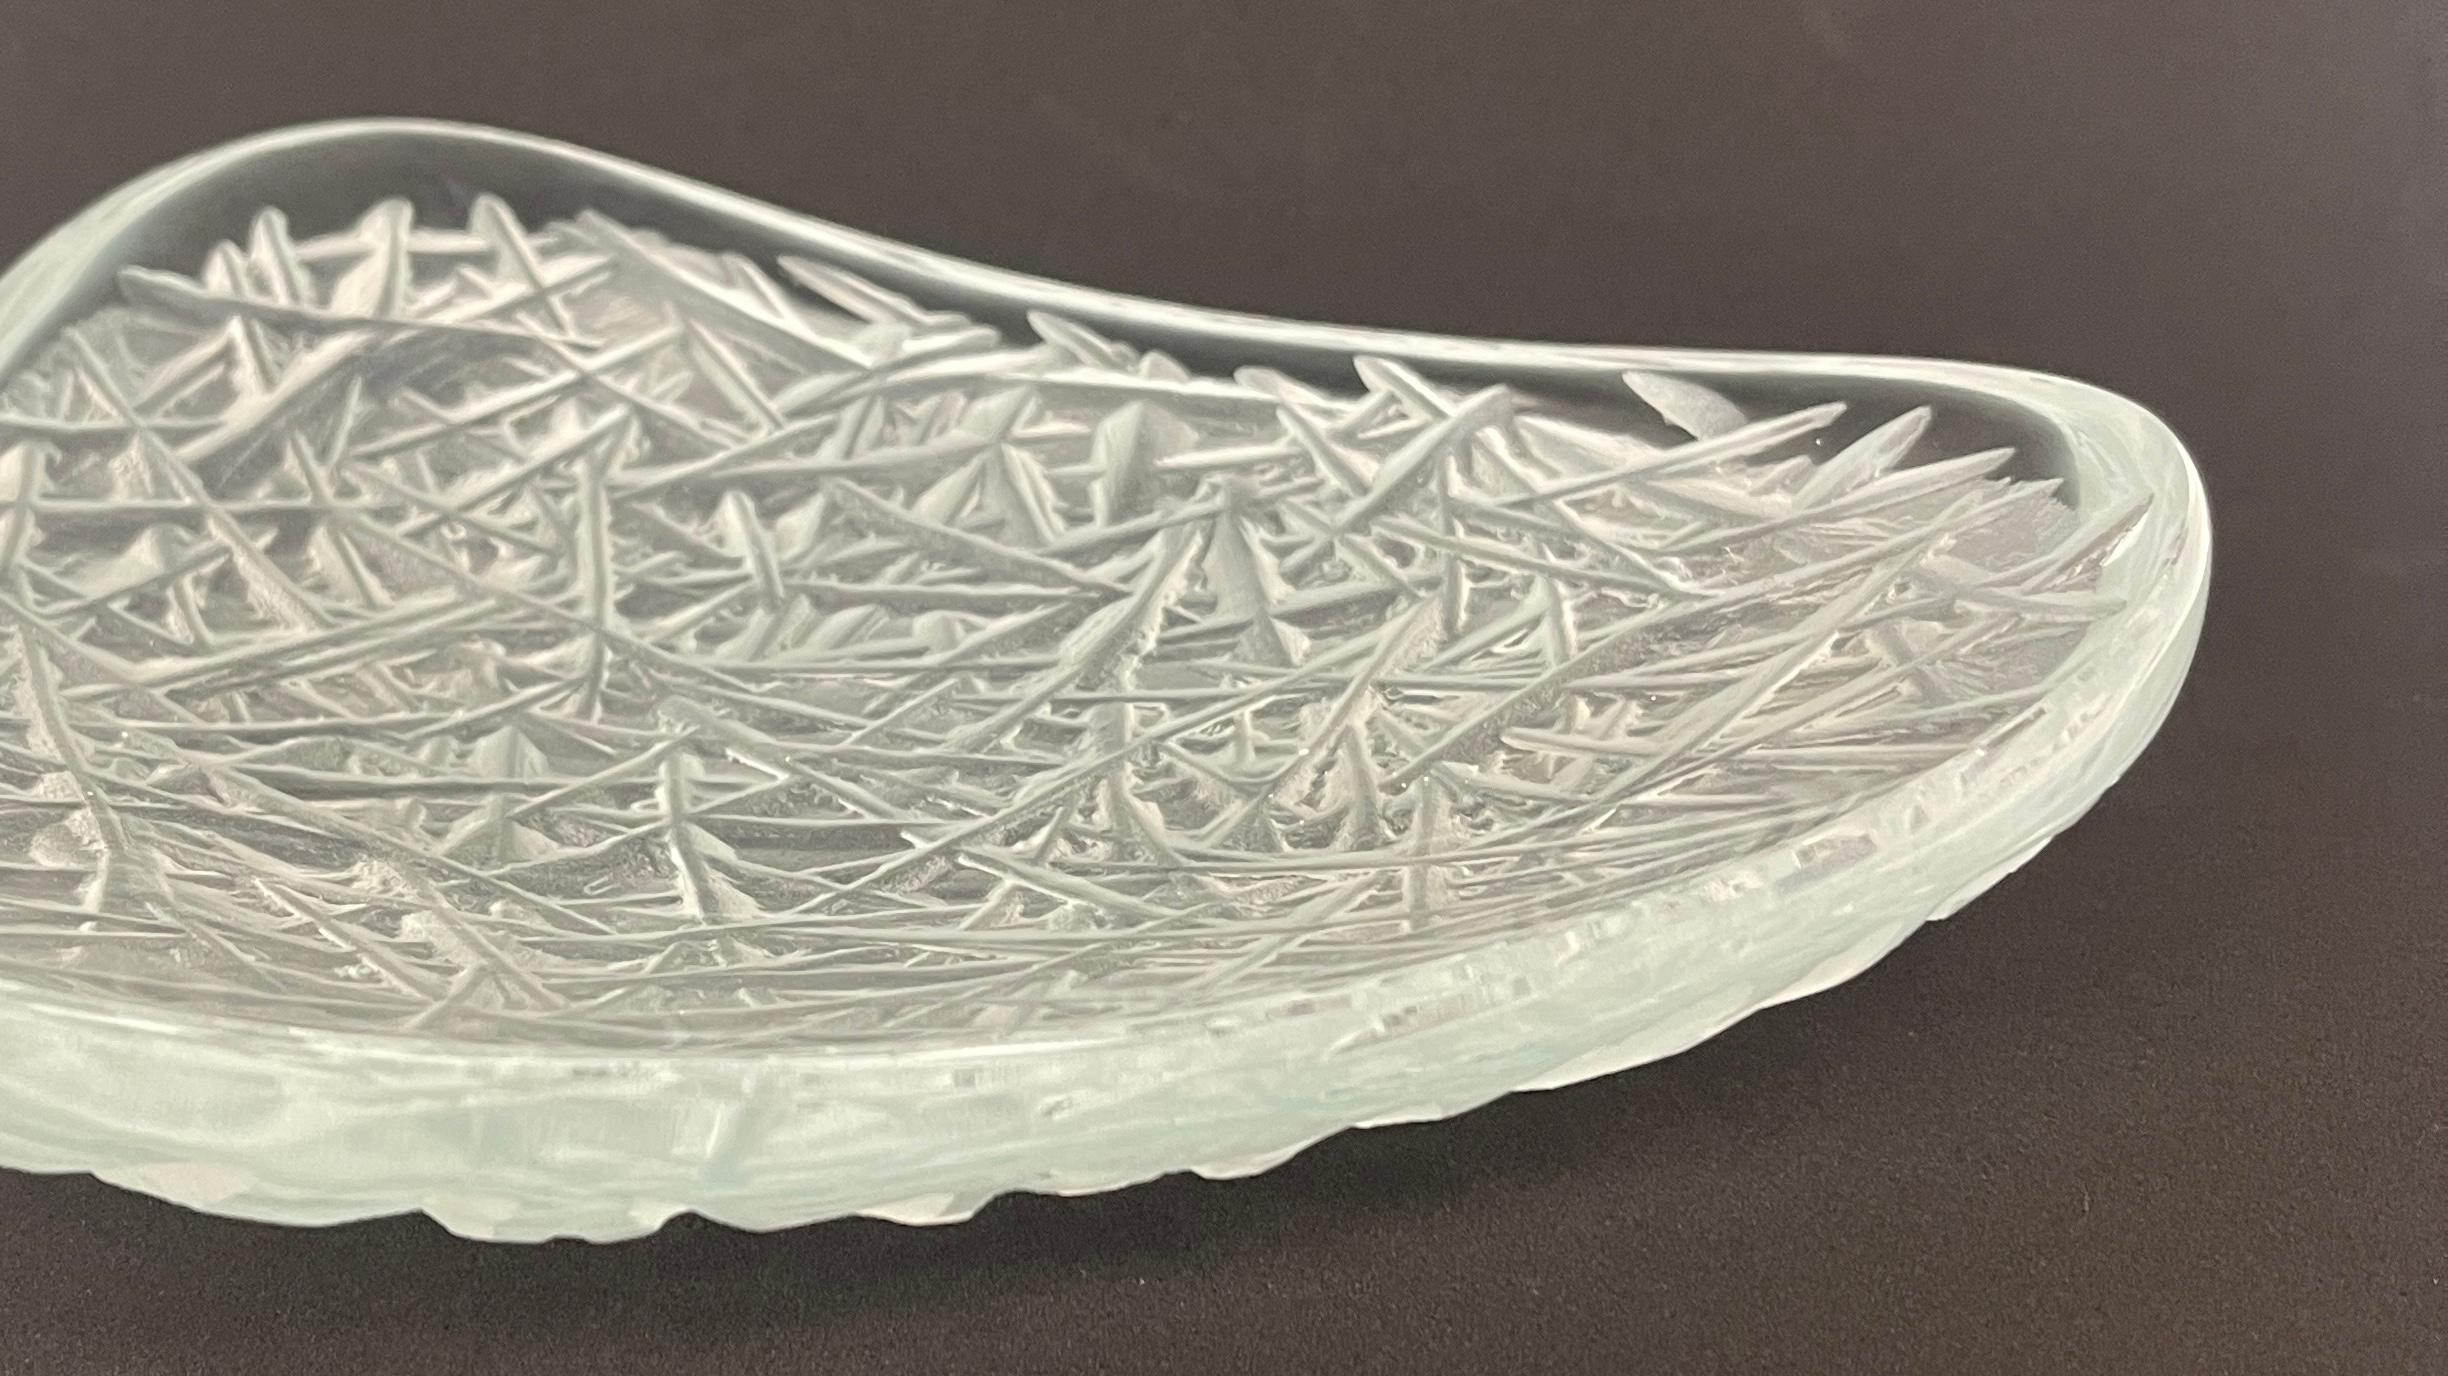 Hand-Crafted Unique Contemporary Hand-engraved Crystal Bowl by Ghiró Studio For Sale